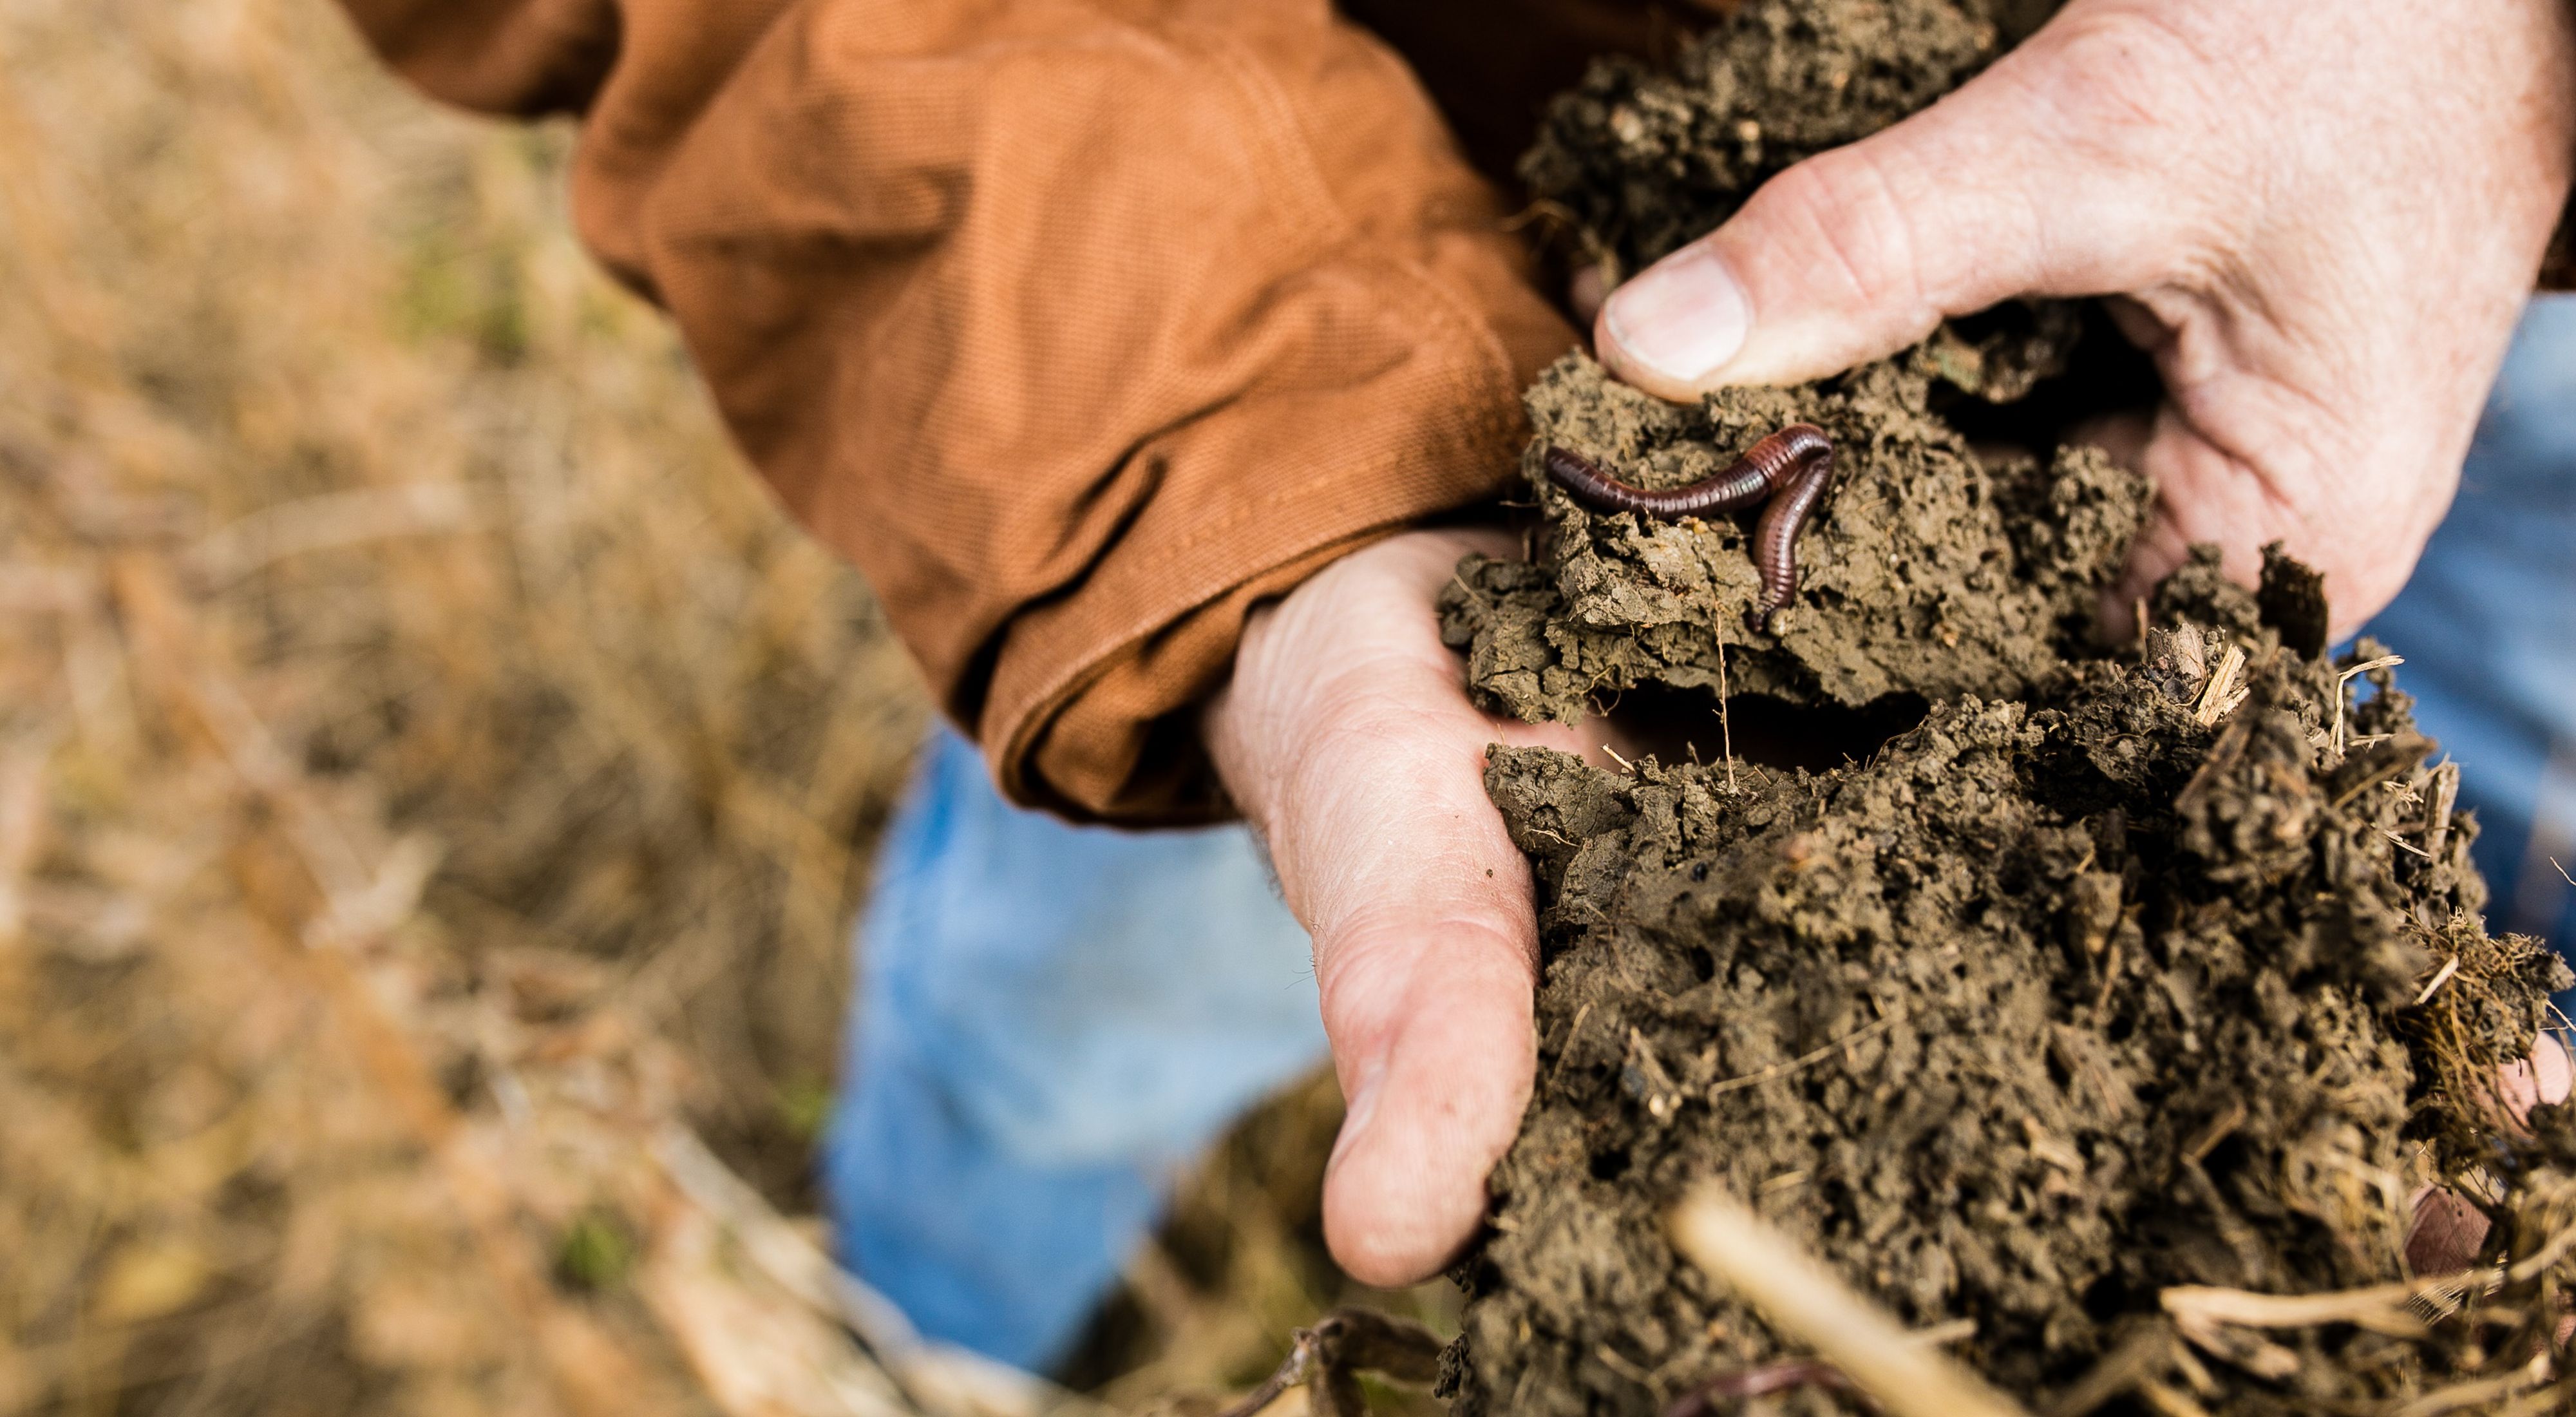 Soil is one of the most biologically diverse ecosystems on Earth.